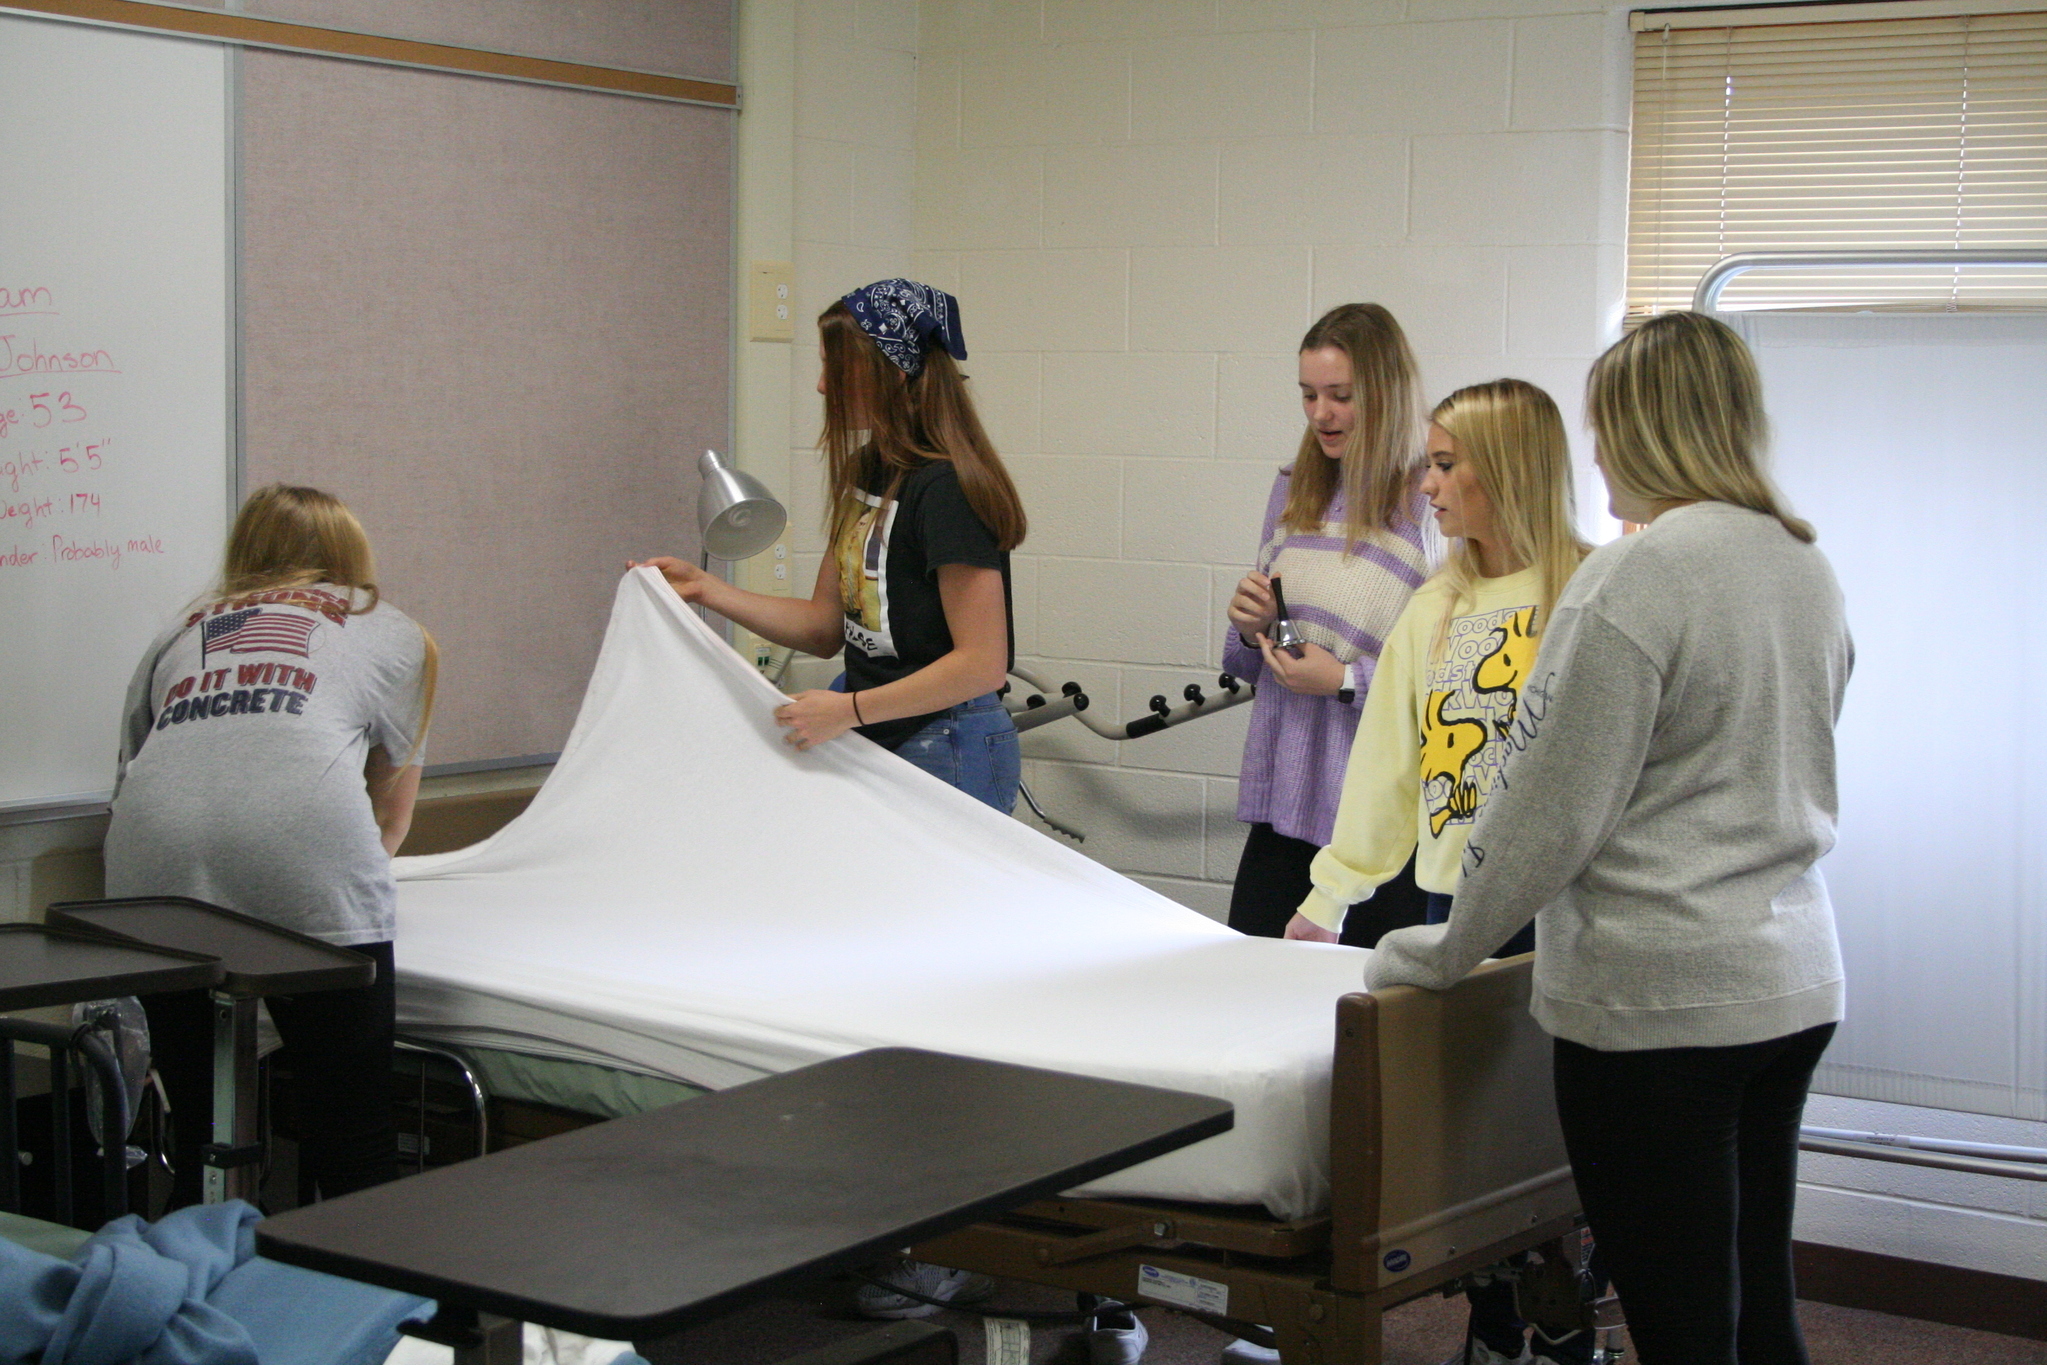 Medical Occupations students learning how to make a hospital bed